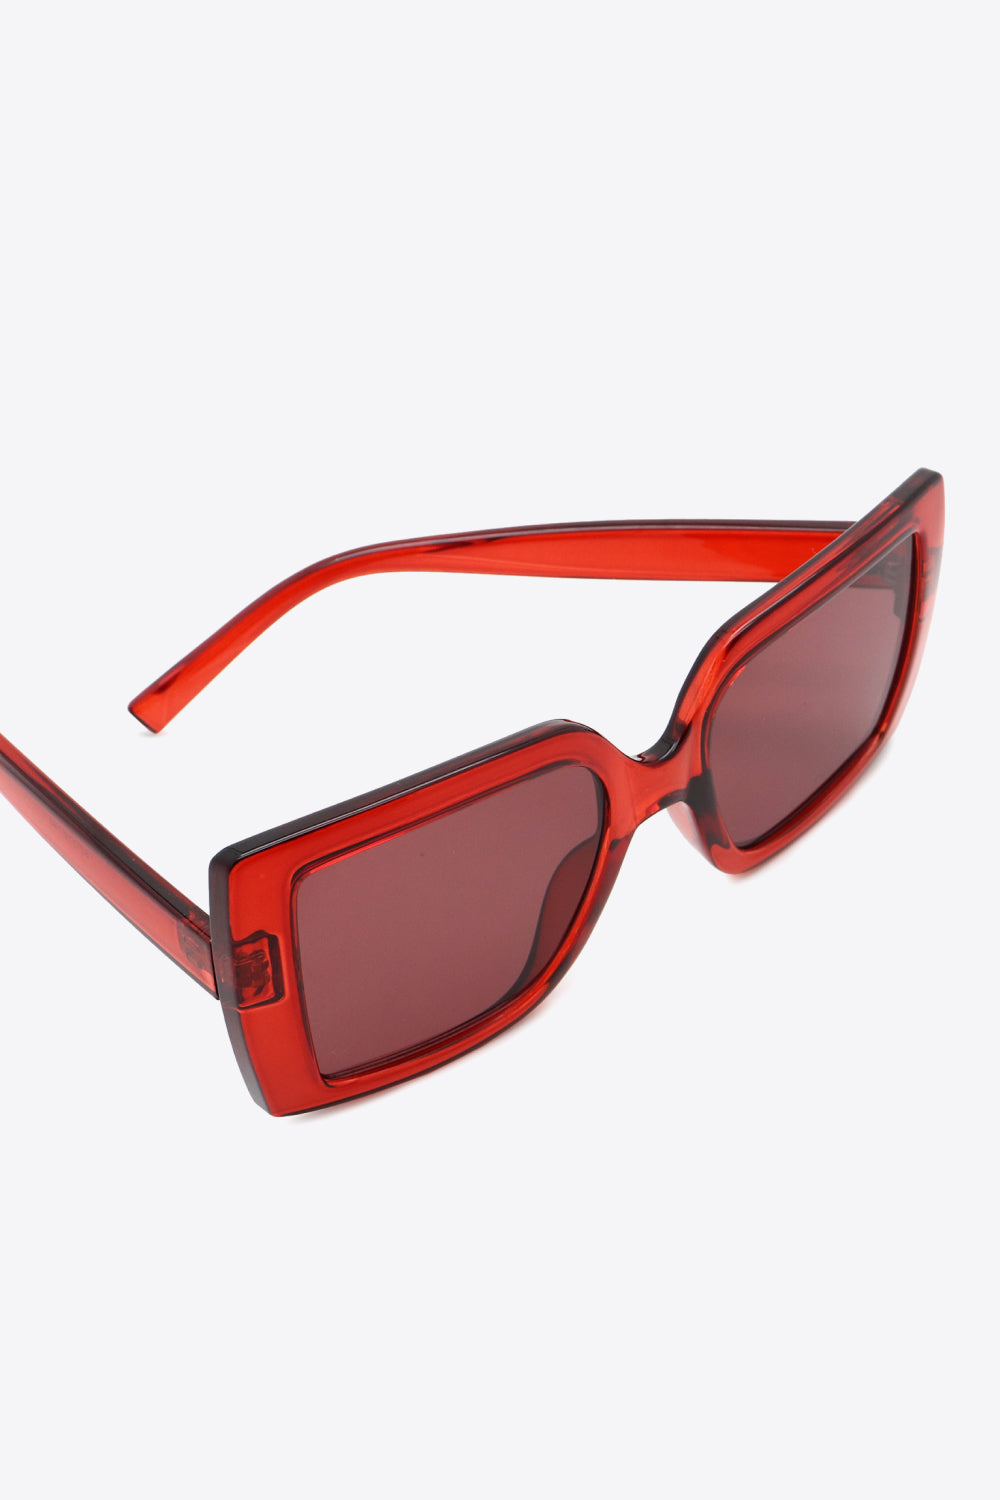 70's Hollywood Red Acetate Lens Square Frame Sunglasses